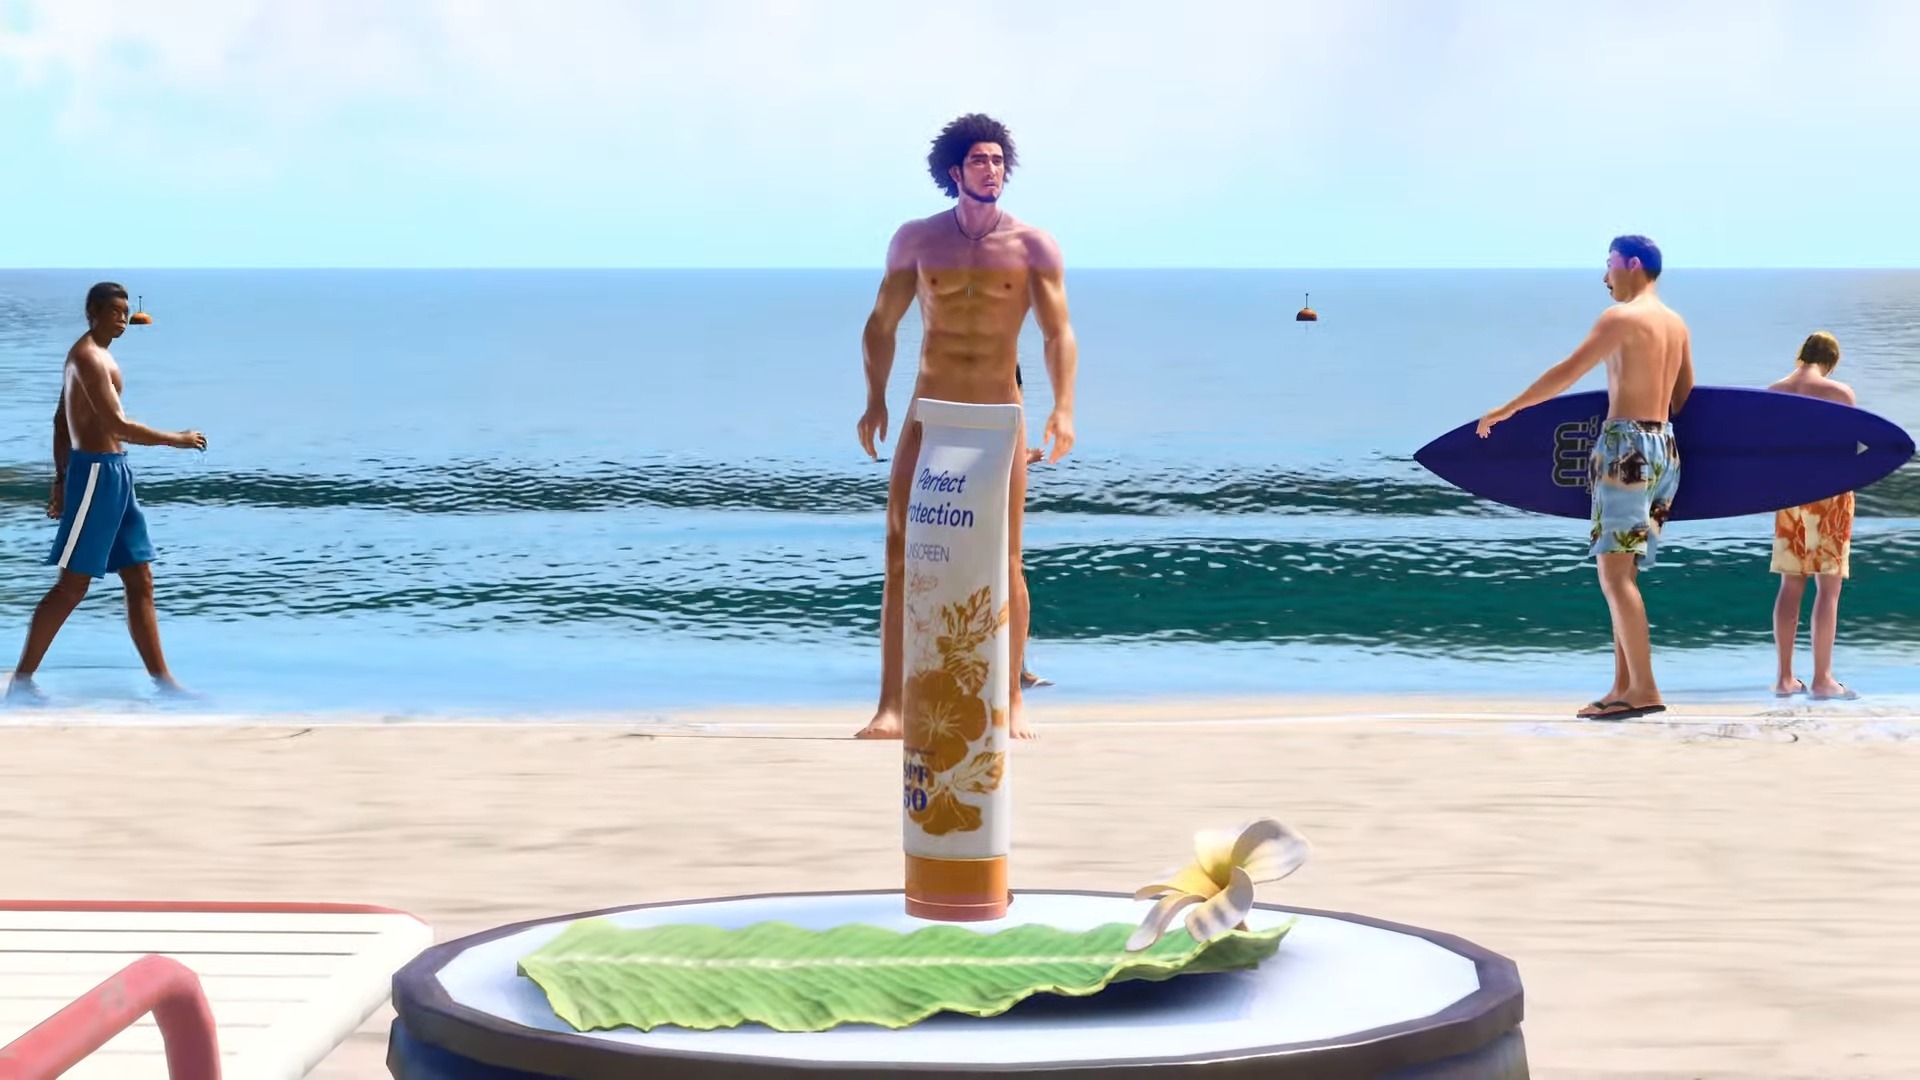 ichiban standing on the beach in the buff